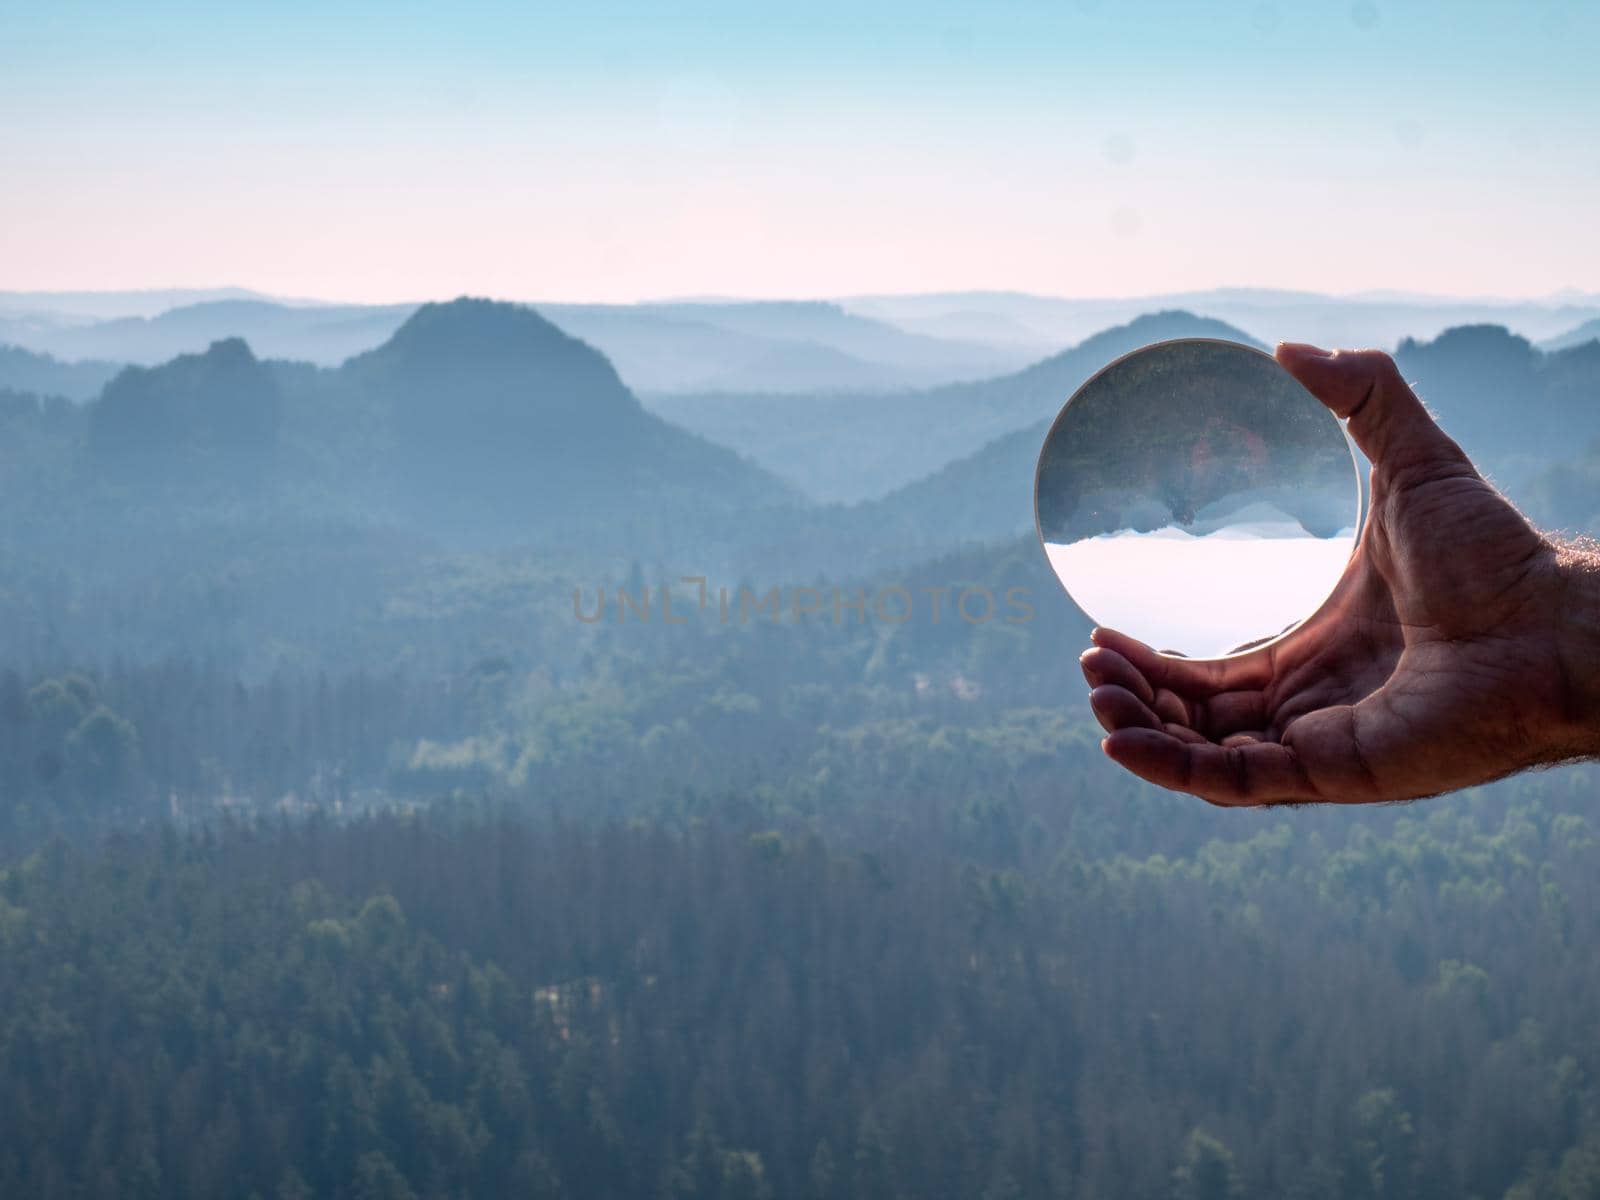 Look to the Grosser Zschand valley through the crystal ball in hand. Popular glass lens effect, abstract view
